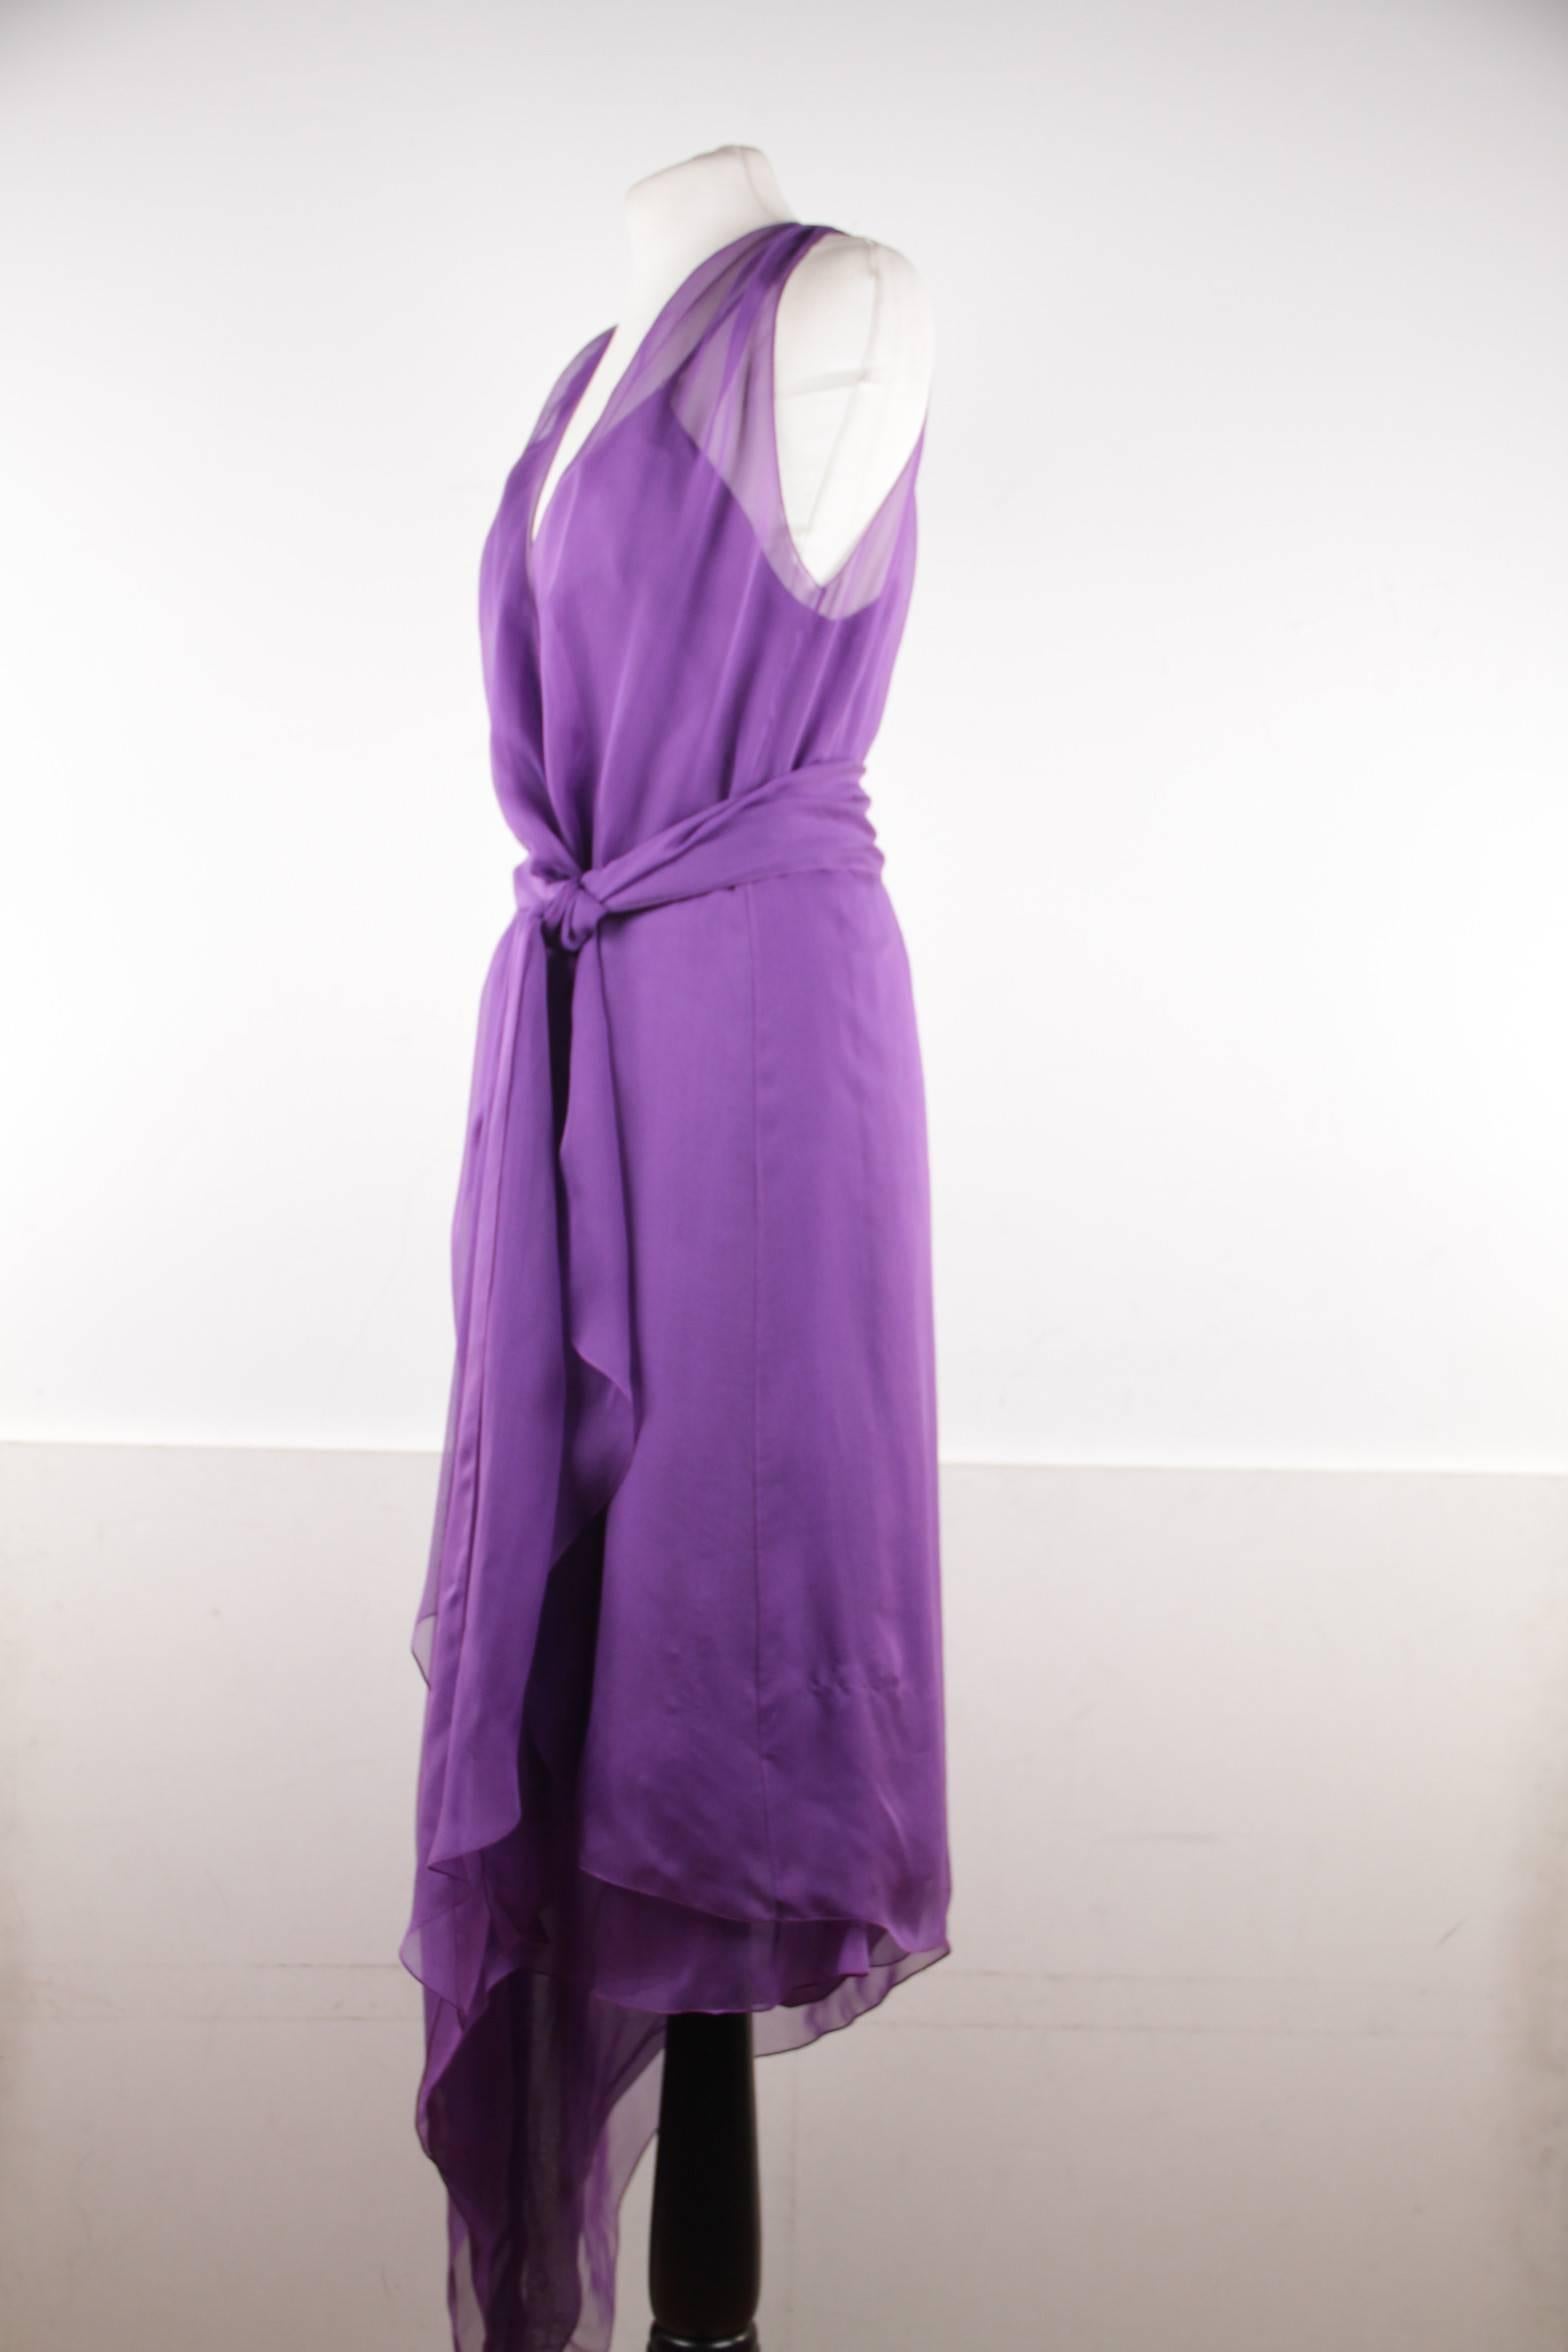 - Beautiful CHANEL elegant dress from a 2003 collection.
- Includes a dress and skirt (can be worn under or over dress for layering).
- Crafted in light shiffon silk fabric
- Purple color
- Deep V-nekline
- CC - CHANEL logos detailing on the